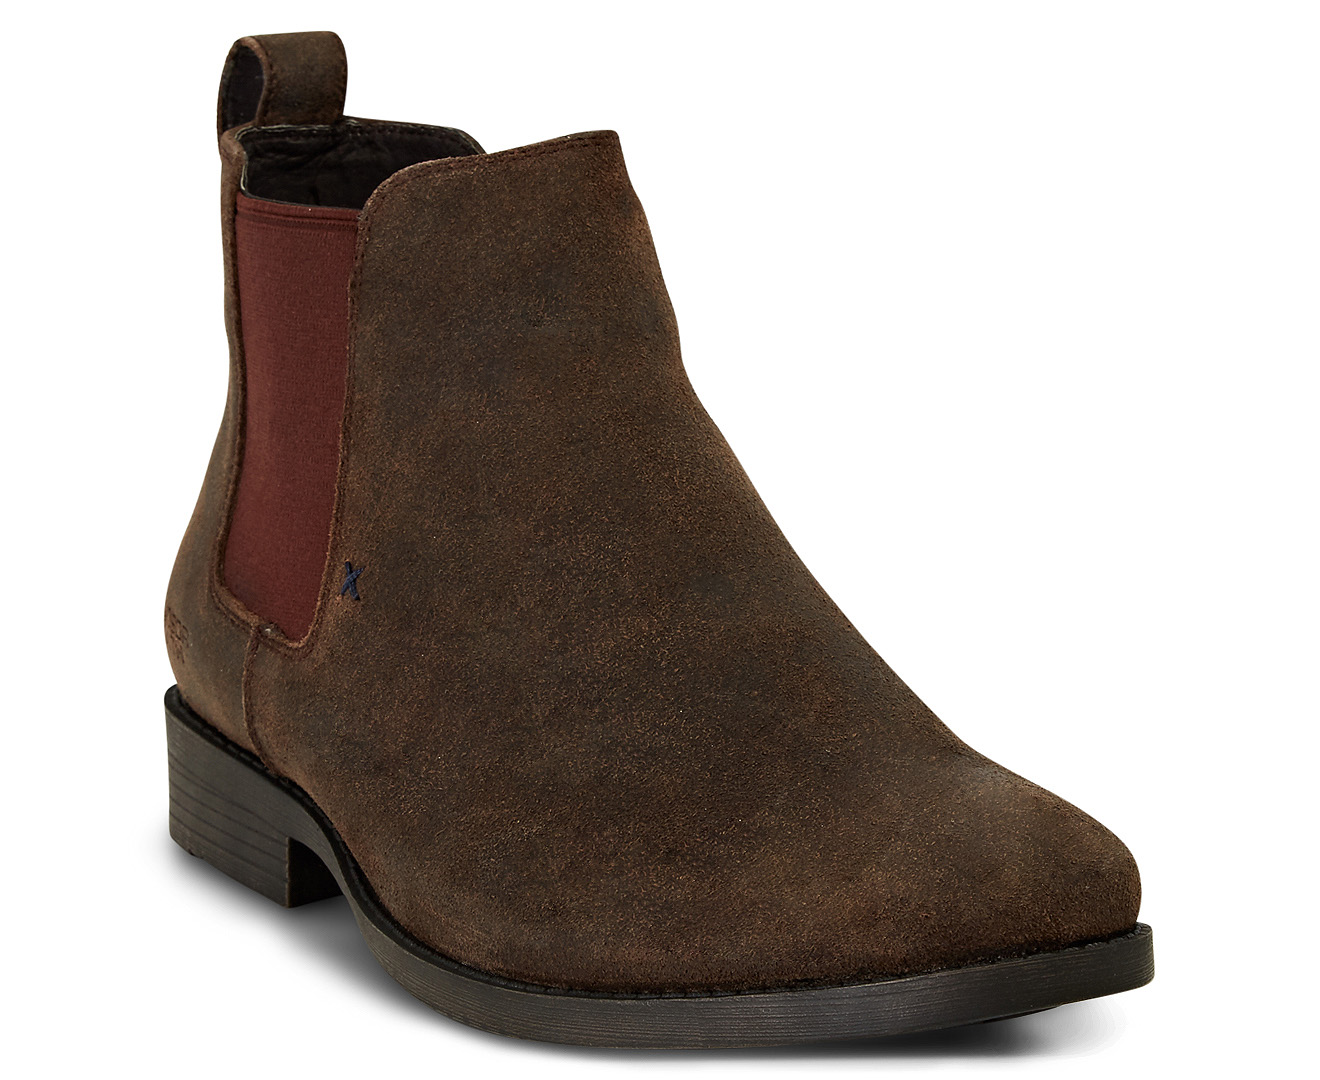 windsor smith suede boots